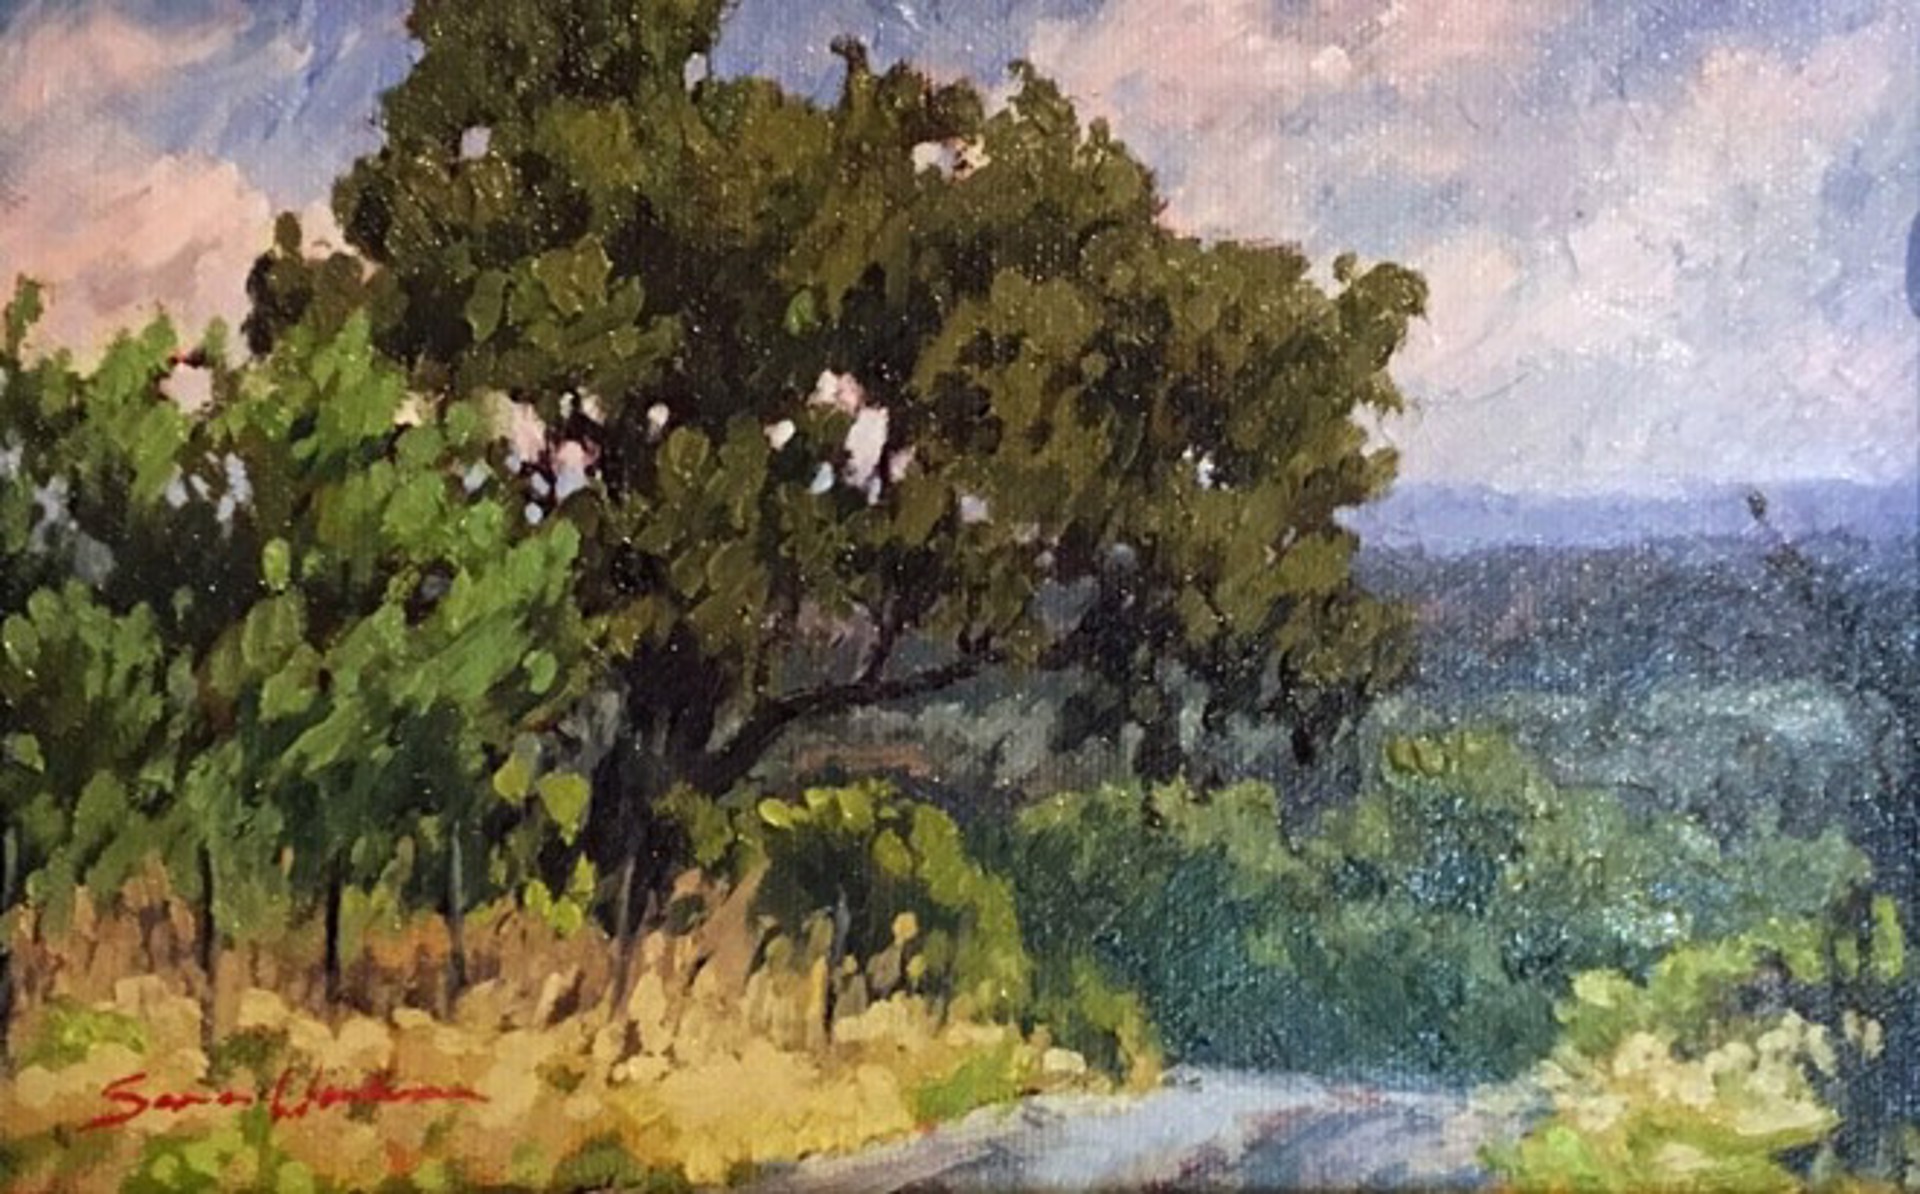 Boerne Outback by Sara (Ahearn) Winters